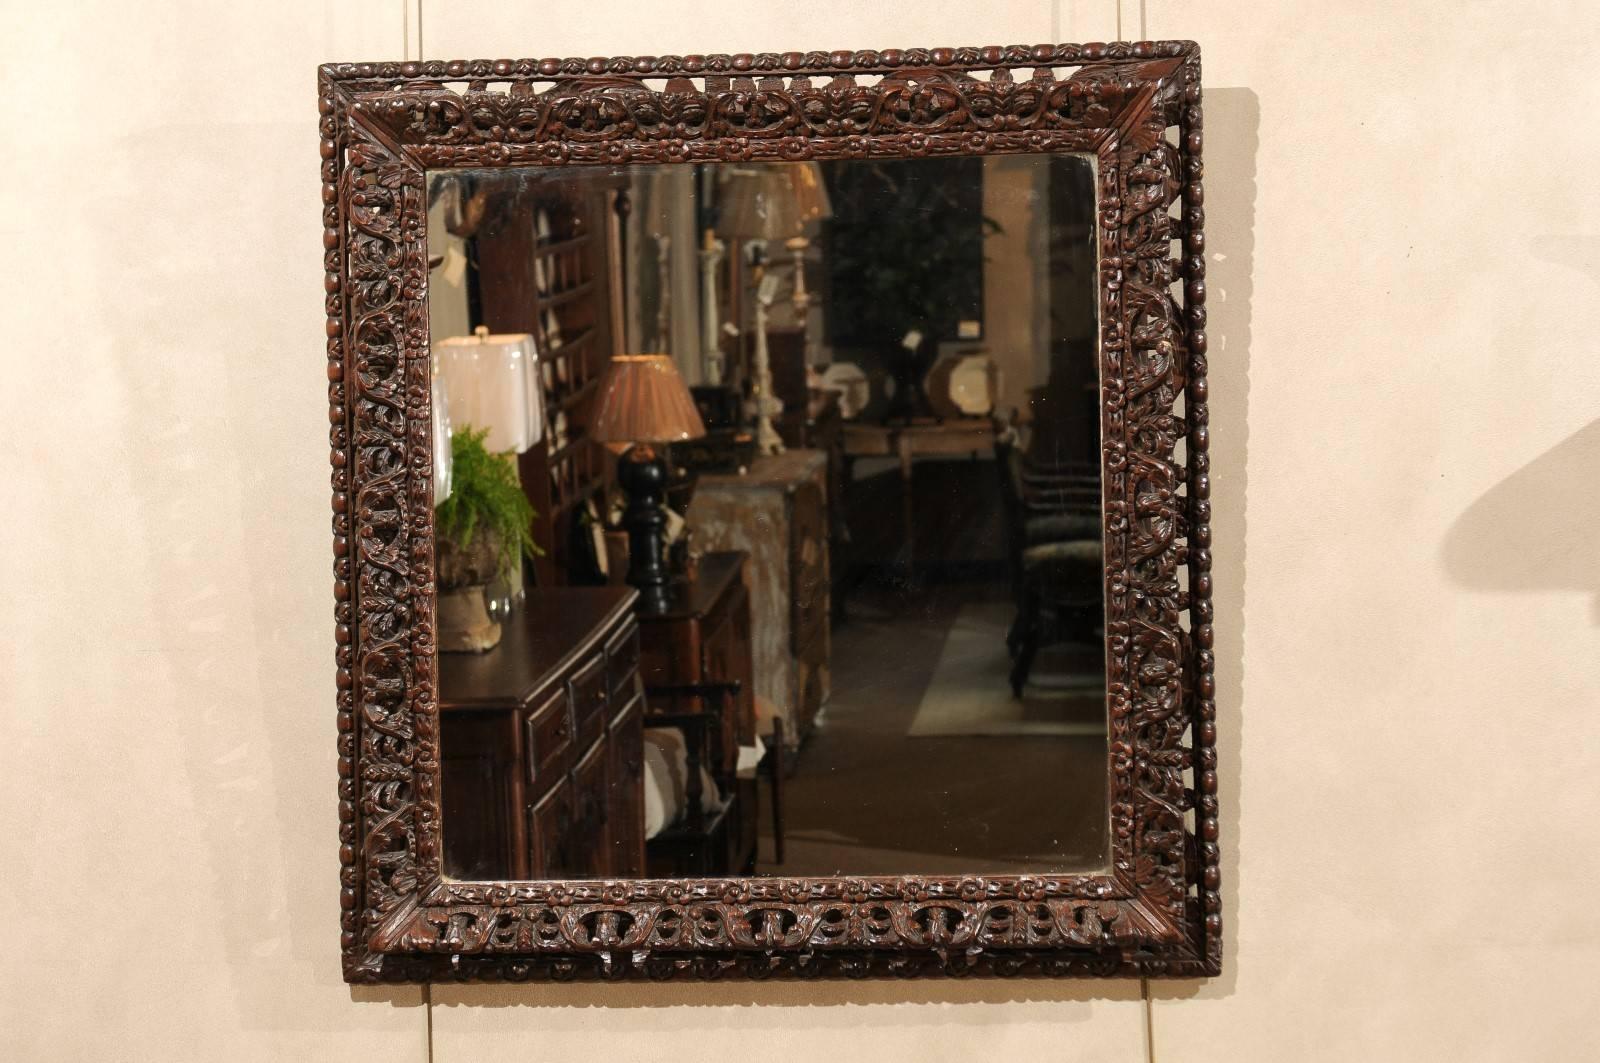 Early 20th century Black Forest mirror, circa 1900
A very intricately carved frame, in dark oak, interspersed with small small flowers from the Black Forest. The shape is not quite square but gives the appearance of square.